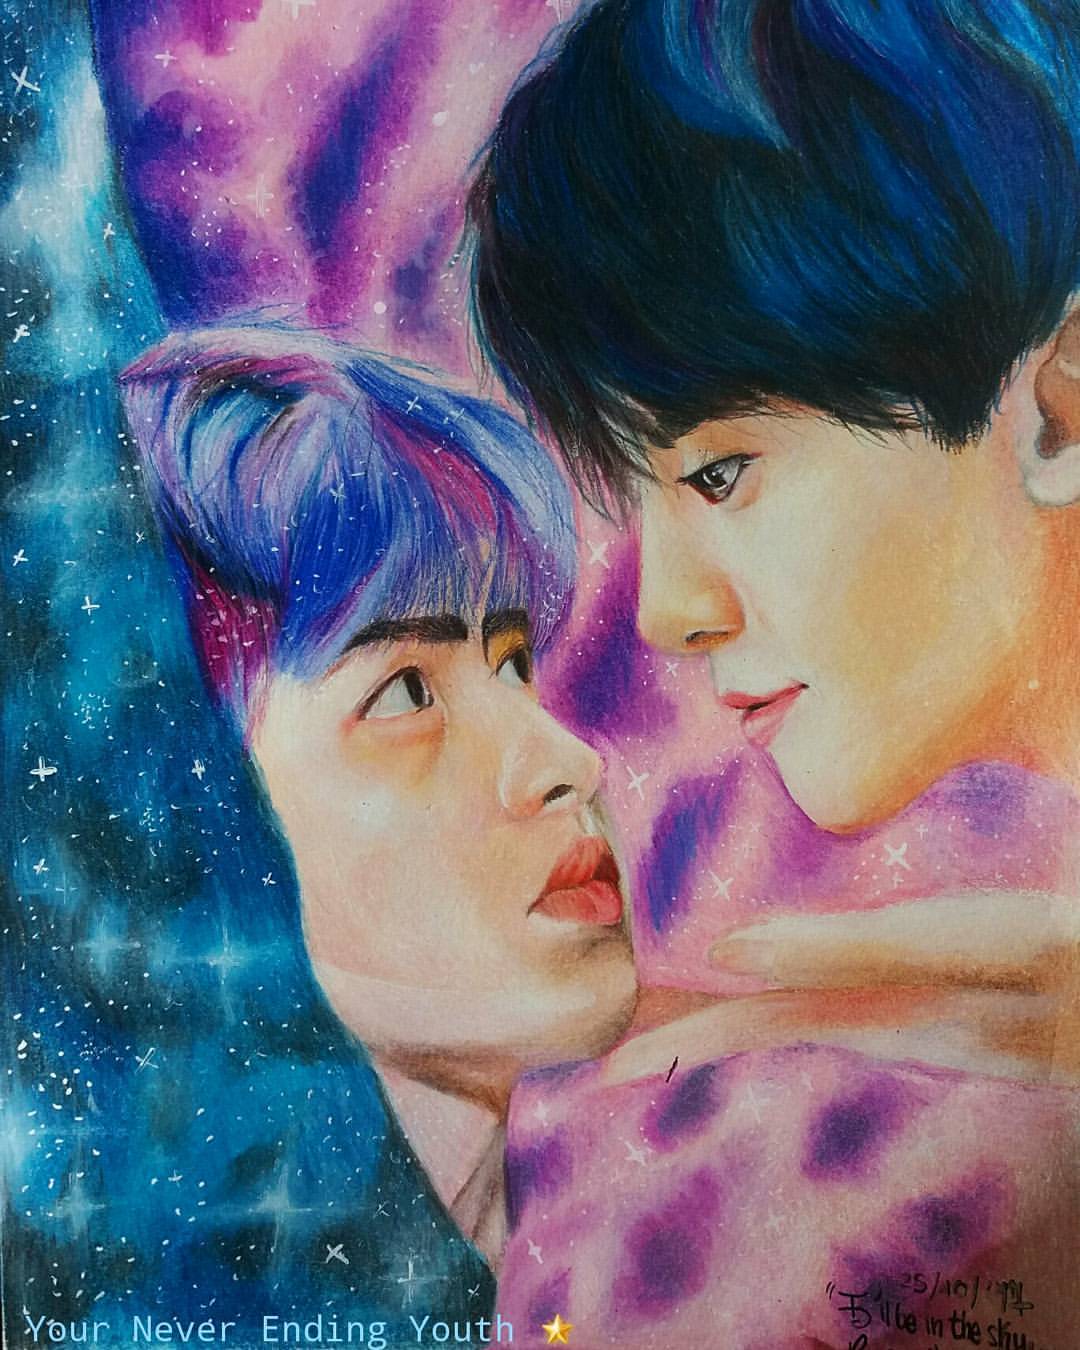 “ Children of the Cosmos 🌌 ”
• You’ll find me in the night sky, Chanyeol. •
Ehy guyyys! 😍
How much time! ❤
I finished this piece about @real__pcy and @baekhyuune_exo that ive been working on lately and im okay with the result! :’)
I liked it more at...